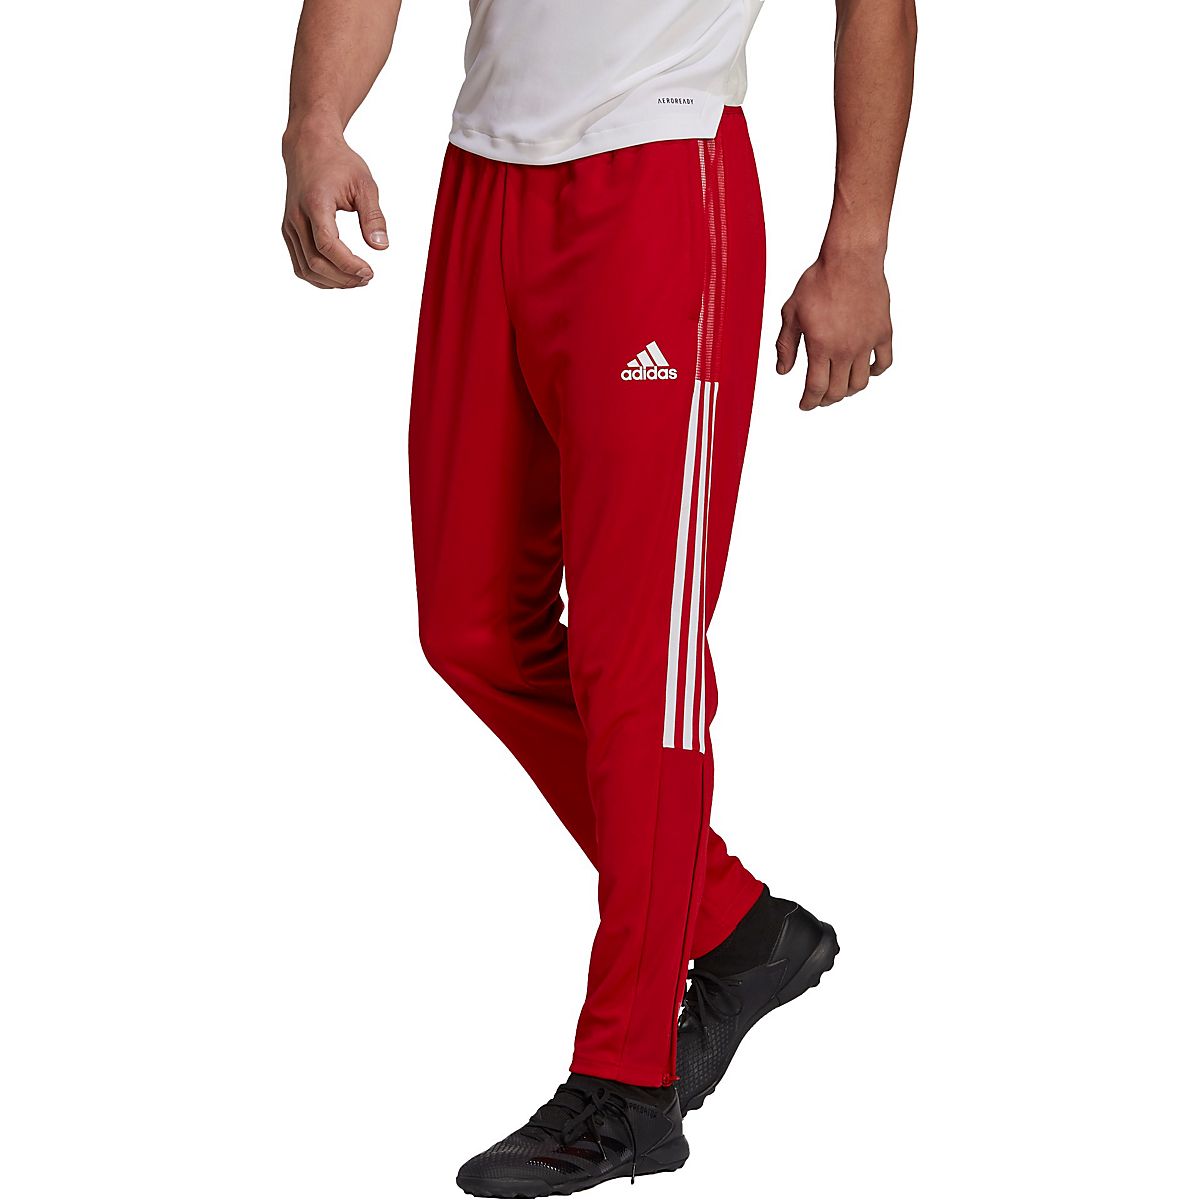 adidas,Womens,TIRO Suit UP Track Pants Lifestyle,Better Scarlet